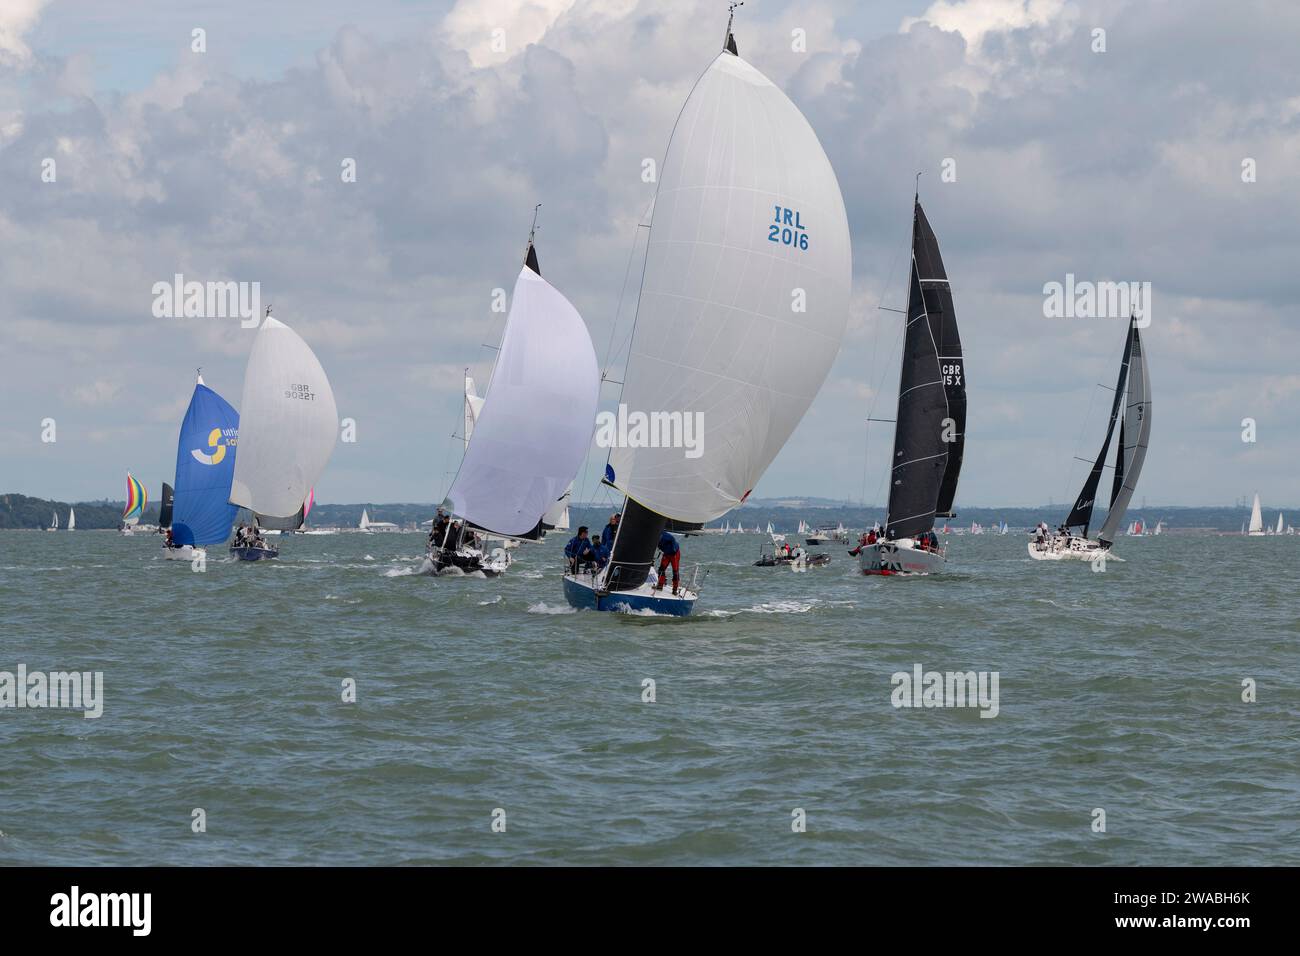 A group of Sailing Yachts at close quarters during a sailboat race during the Cowes Week Regatta. Cowes Week is an annual event held on the IOW Stock Photo